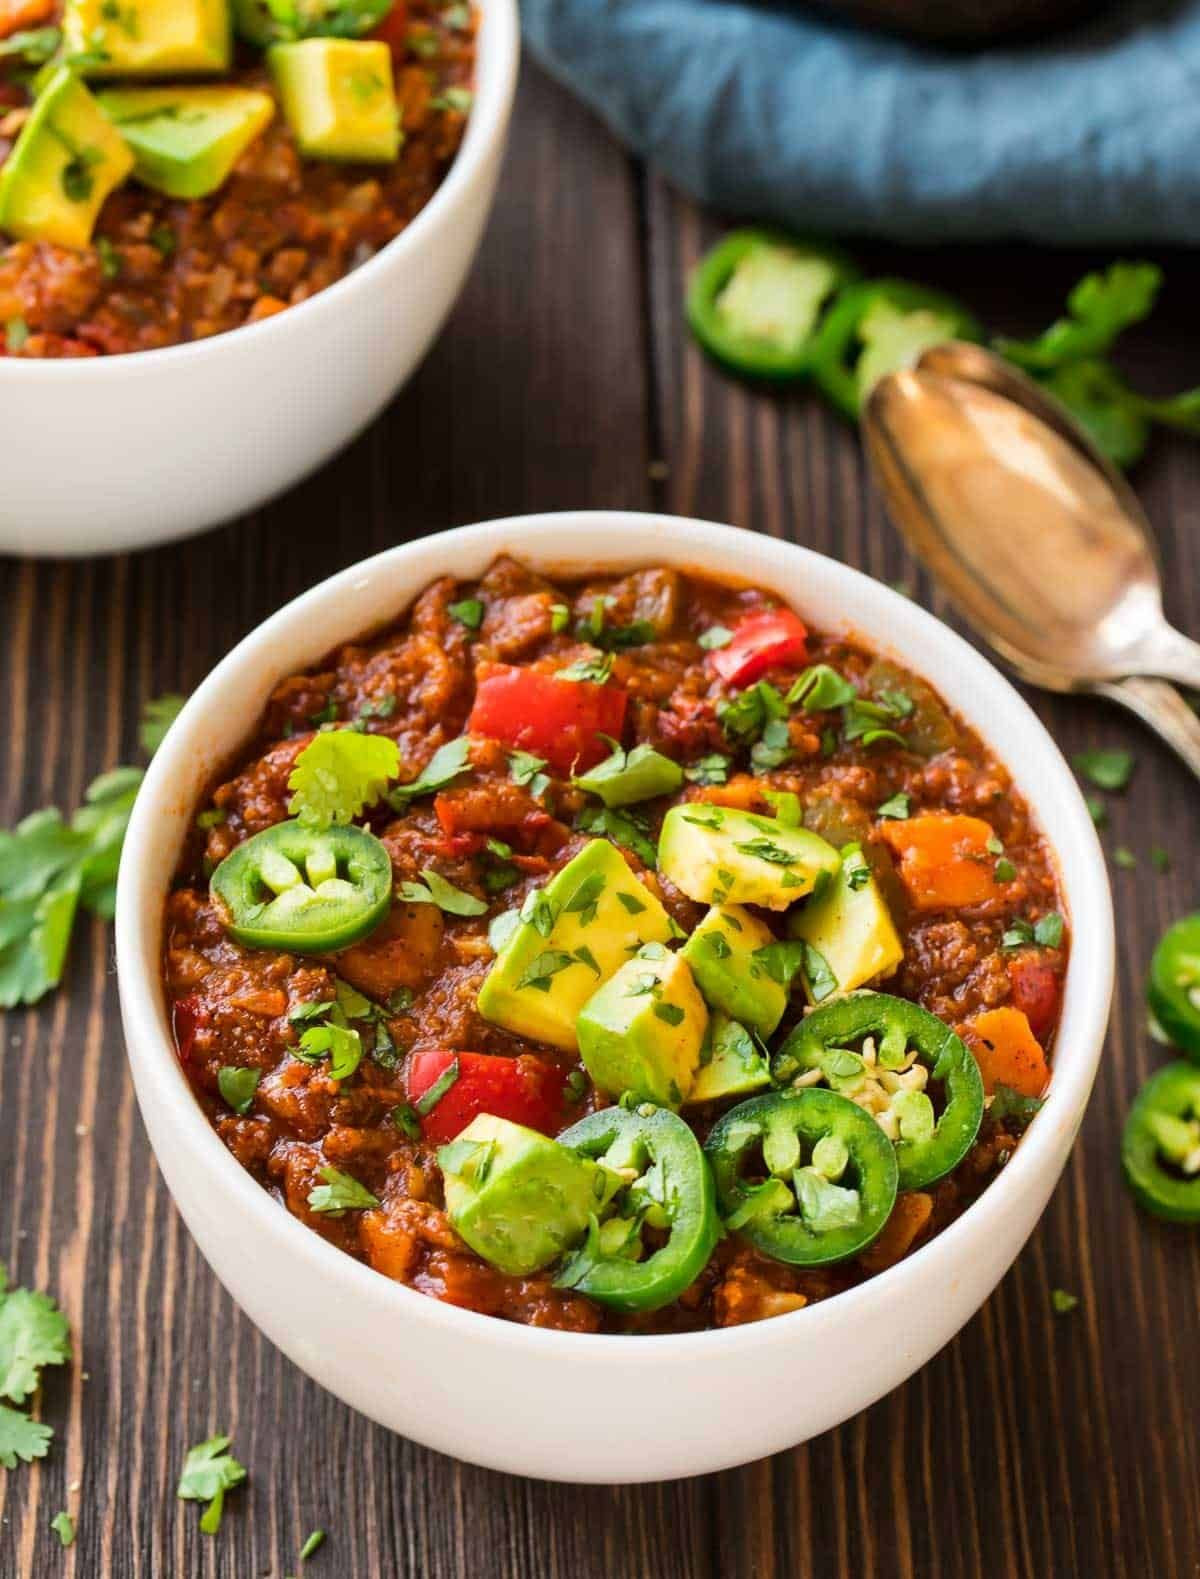 Best Paleo Instant Pot Recipes
 The BEST Paleo Chili made quick and easy in the Instant